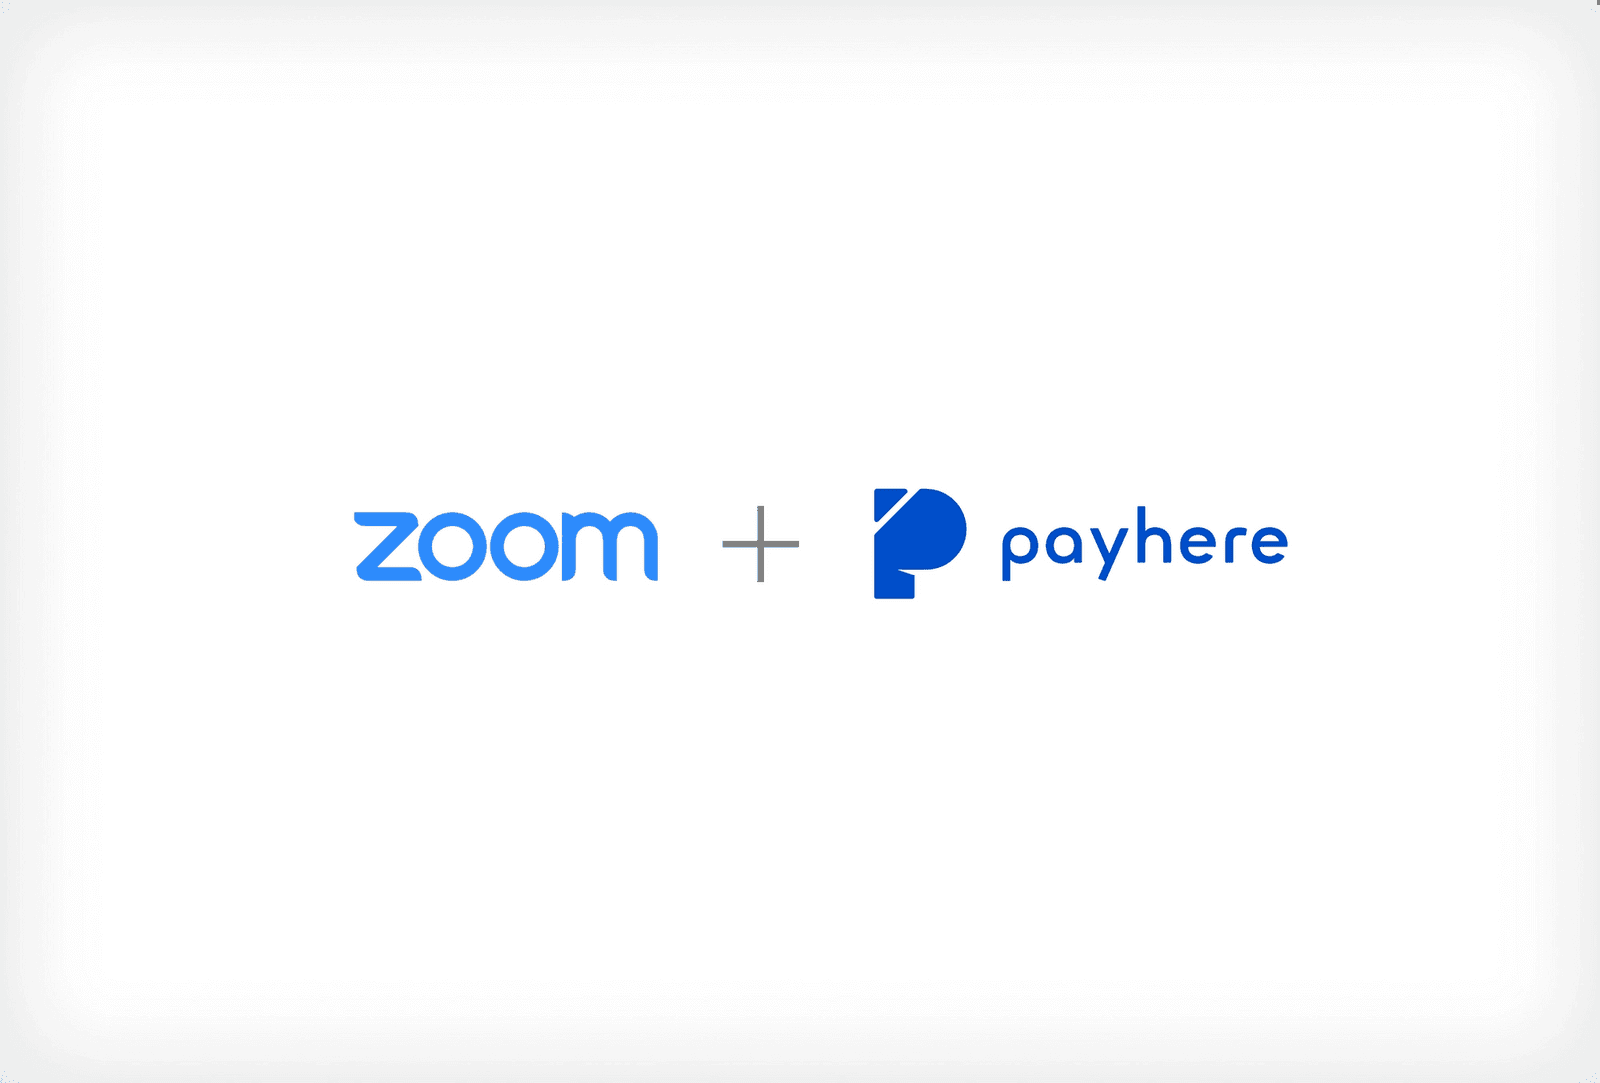 Get paid on Zoom with payhere payment links!